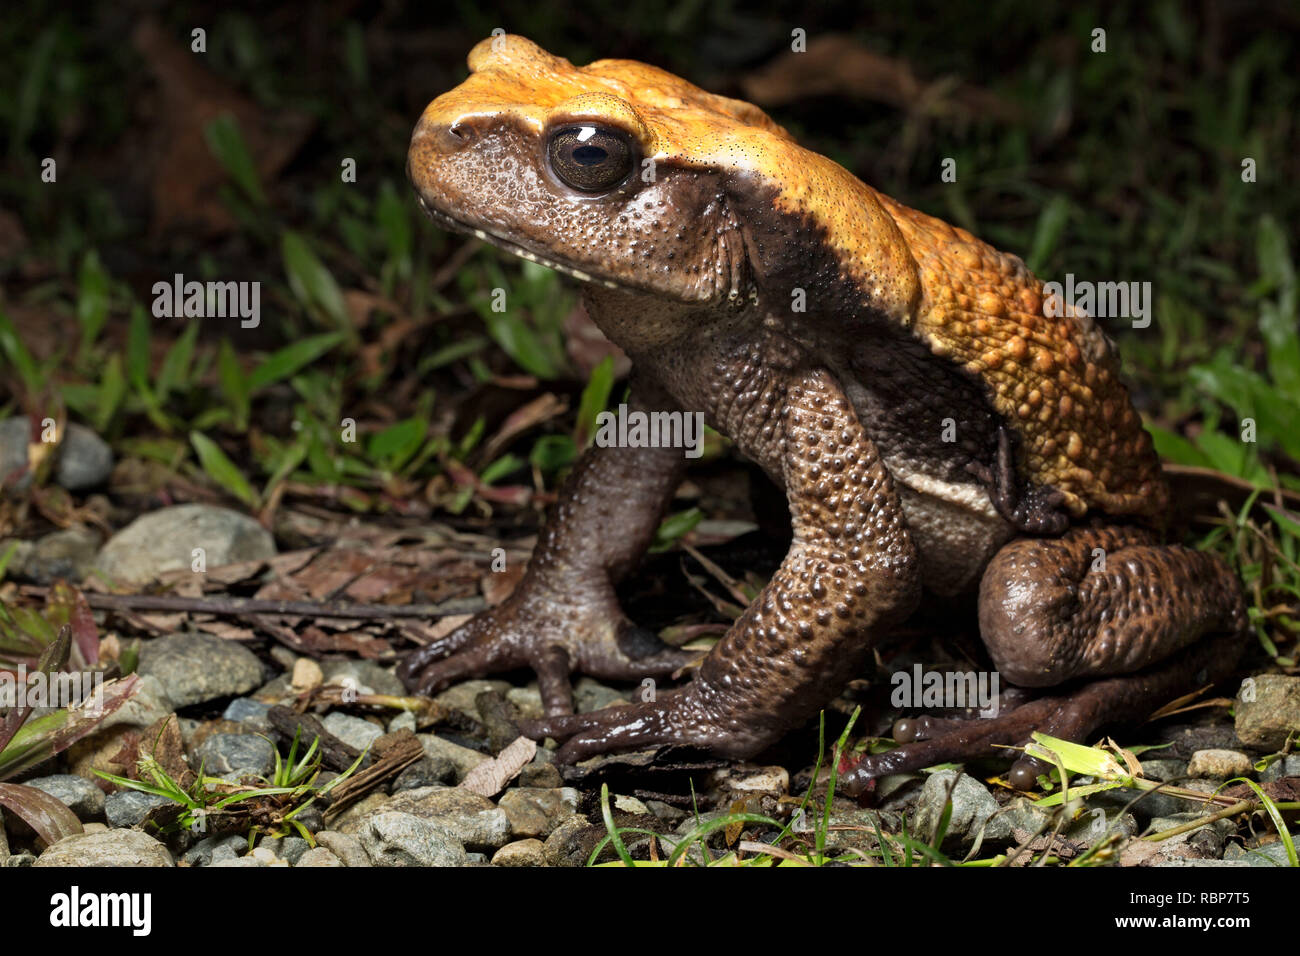 big tropical rain forest toad, Rhaebo blombergi from the tropical jungle of Colombia. An endangered species in need of nature conservation. Stock Photo